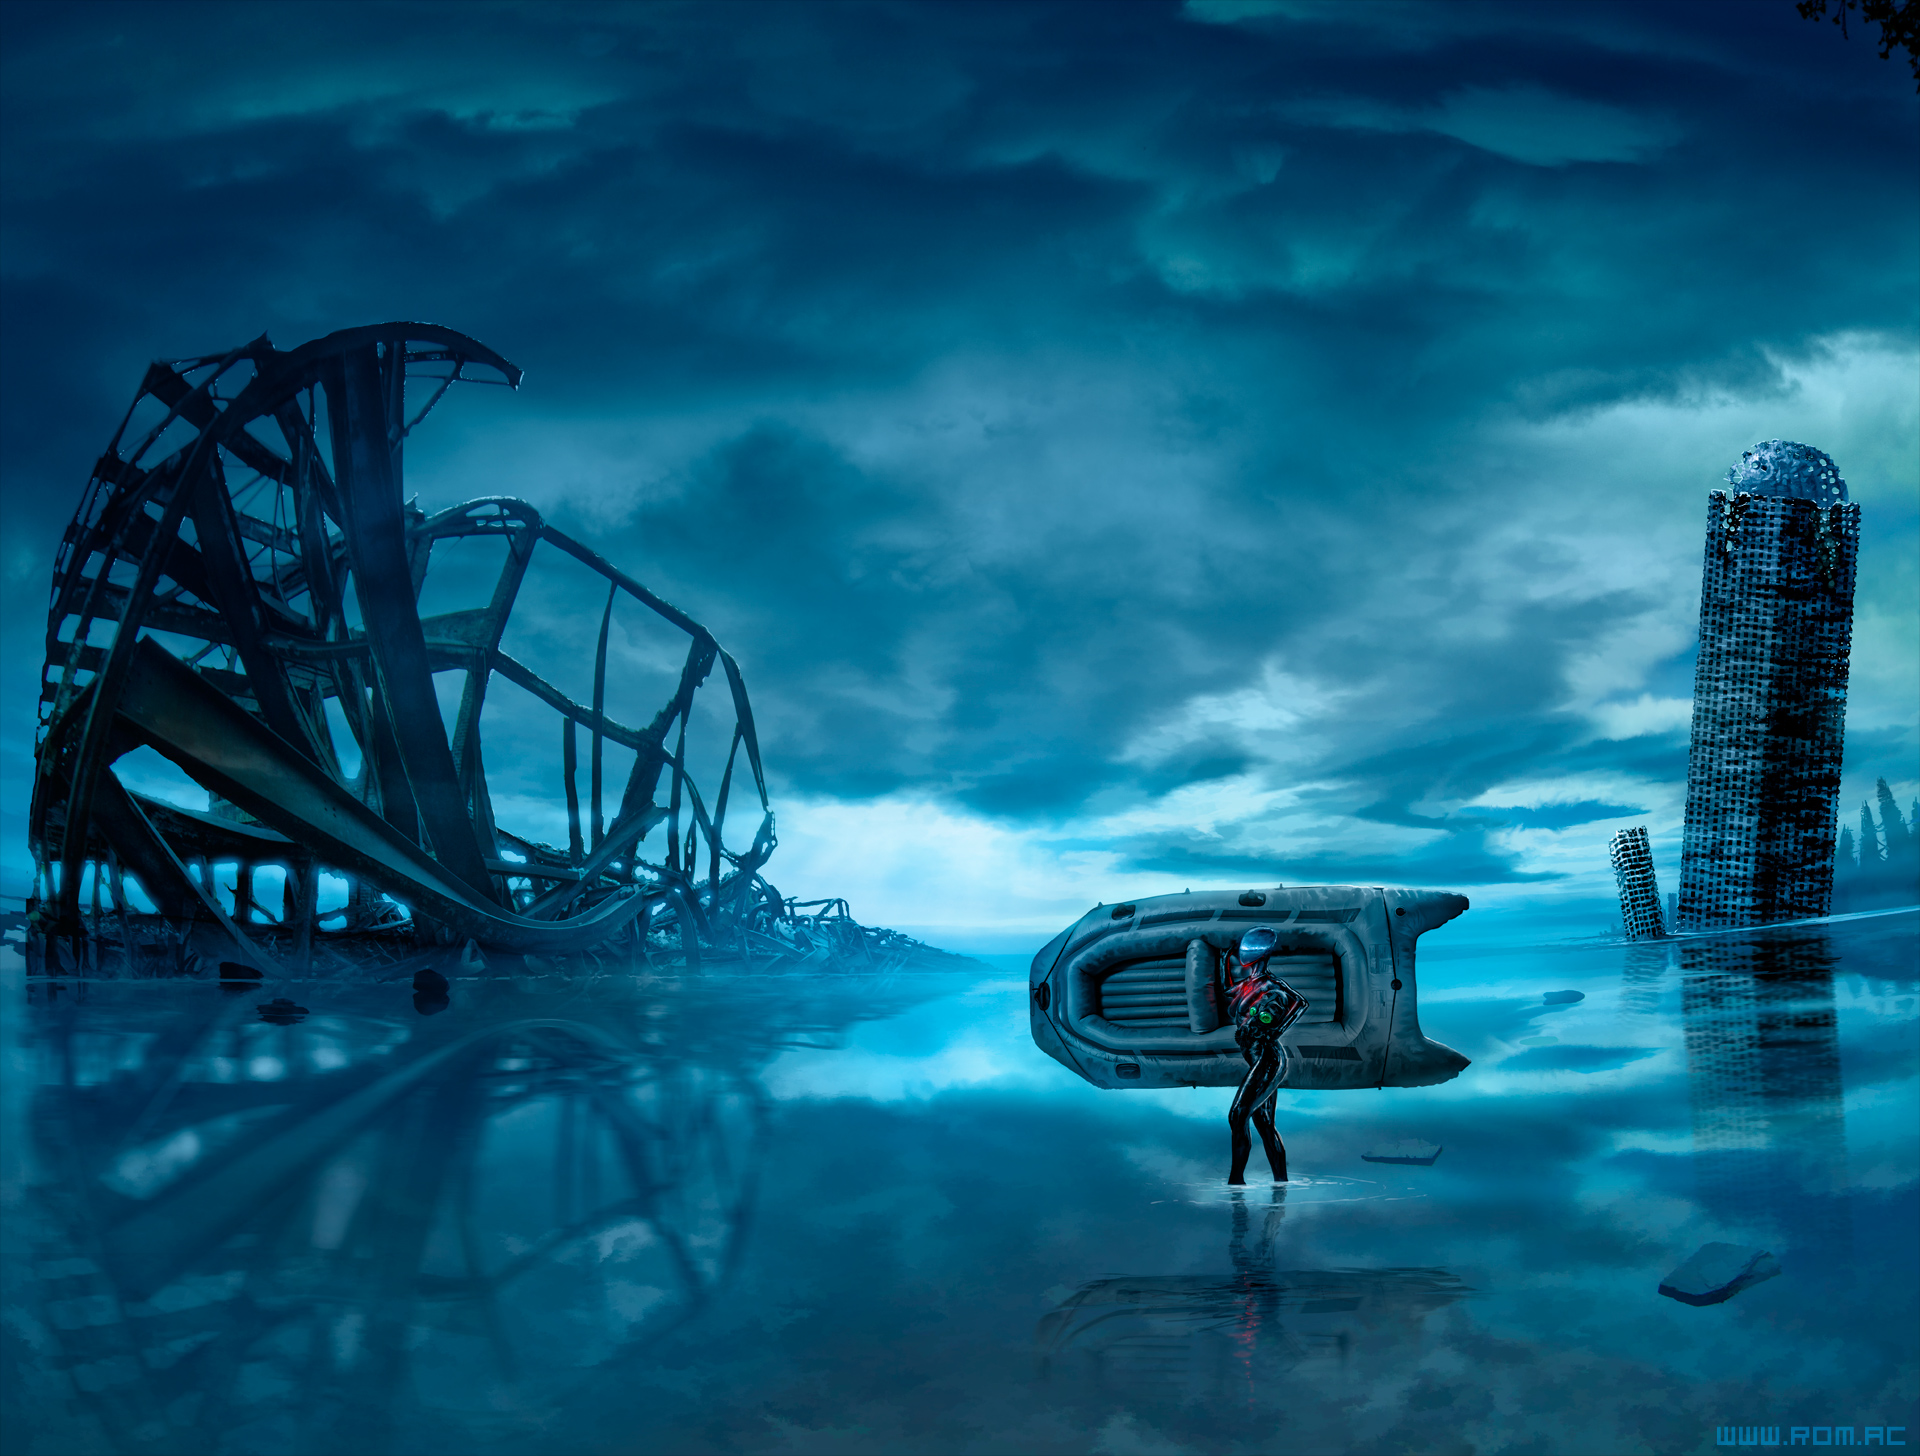 heart, Women, Romantically Apocalyptic, Digital art, Apocalyptic, Water, Reflection, Ruin, Boat, Mask, Clouds, Gas masks Wallpaper